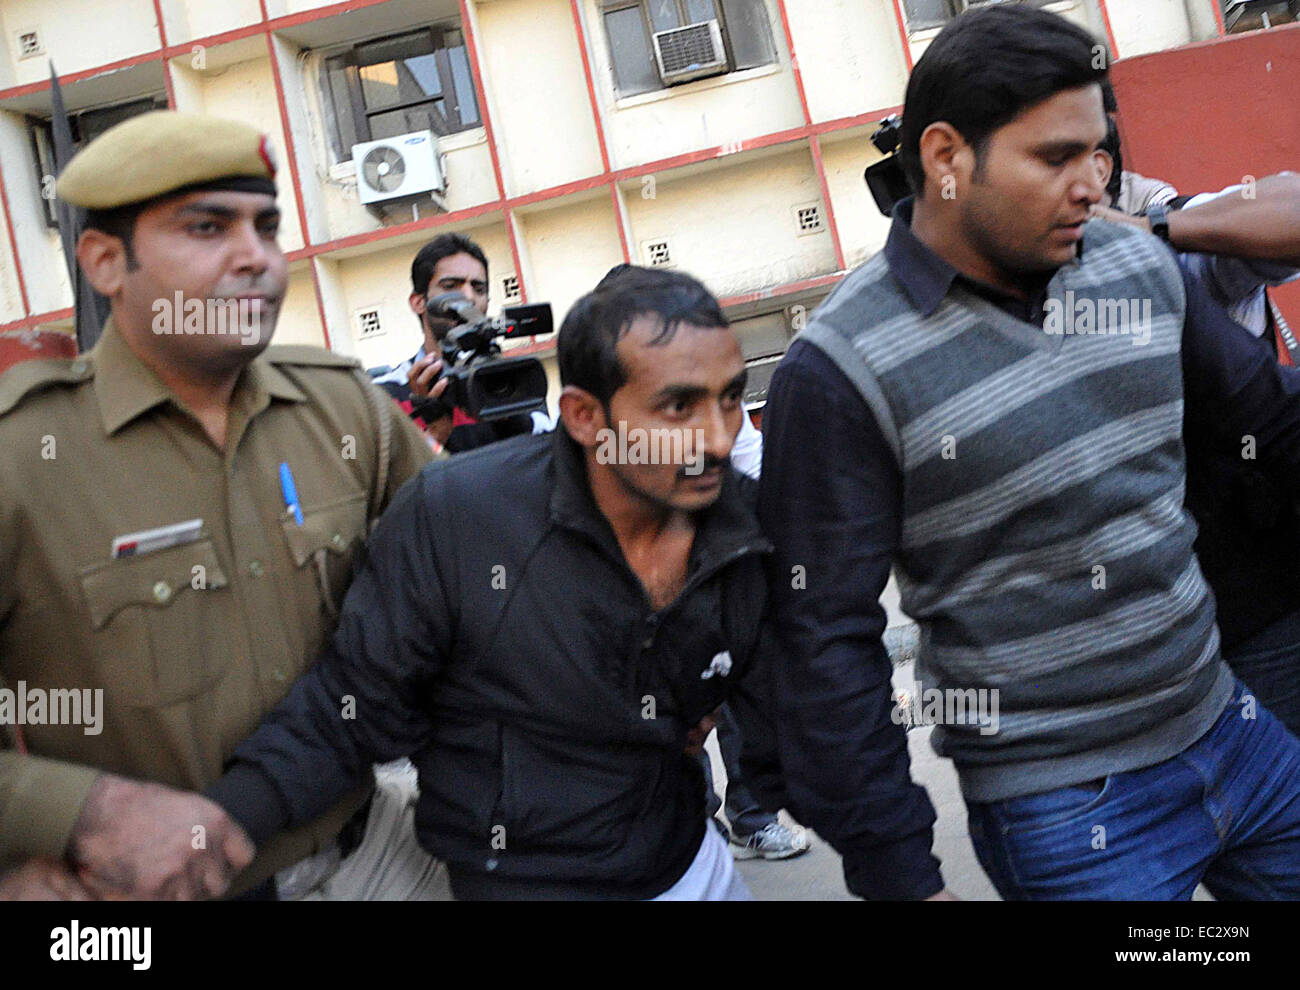 New Delhi, India. 8th Dec, 2014. Shiv Kumar Yadav (C), a taxi driver who was accused of raping, is escorted to the Tis Hazari Court by police officers in New Delhi, India, Dec. 8, 2014. The court has ordered Yadav be held for three days for police questioning over the allegation of his raping a 25-year-old female professional Friday night. © Stringer/Xinhua/Alamy Live News Stock Photo